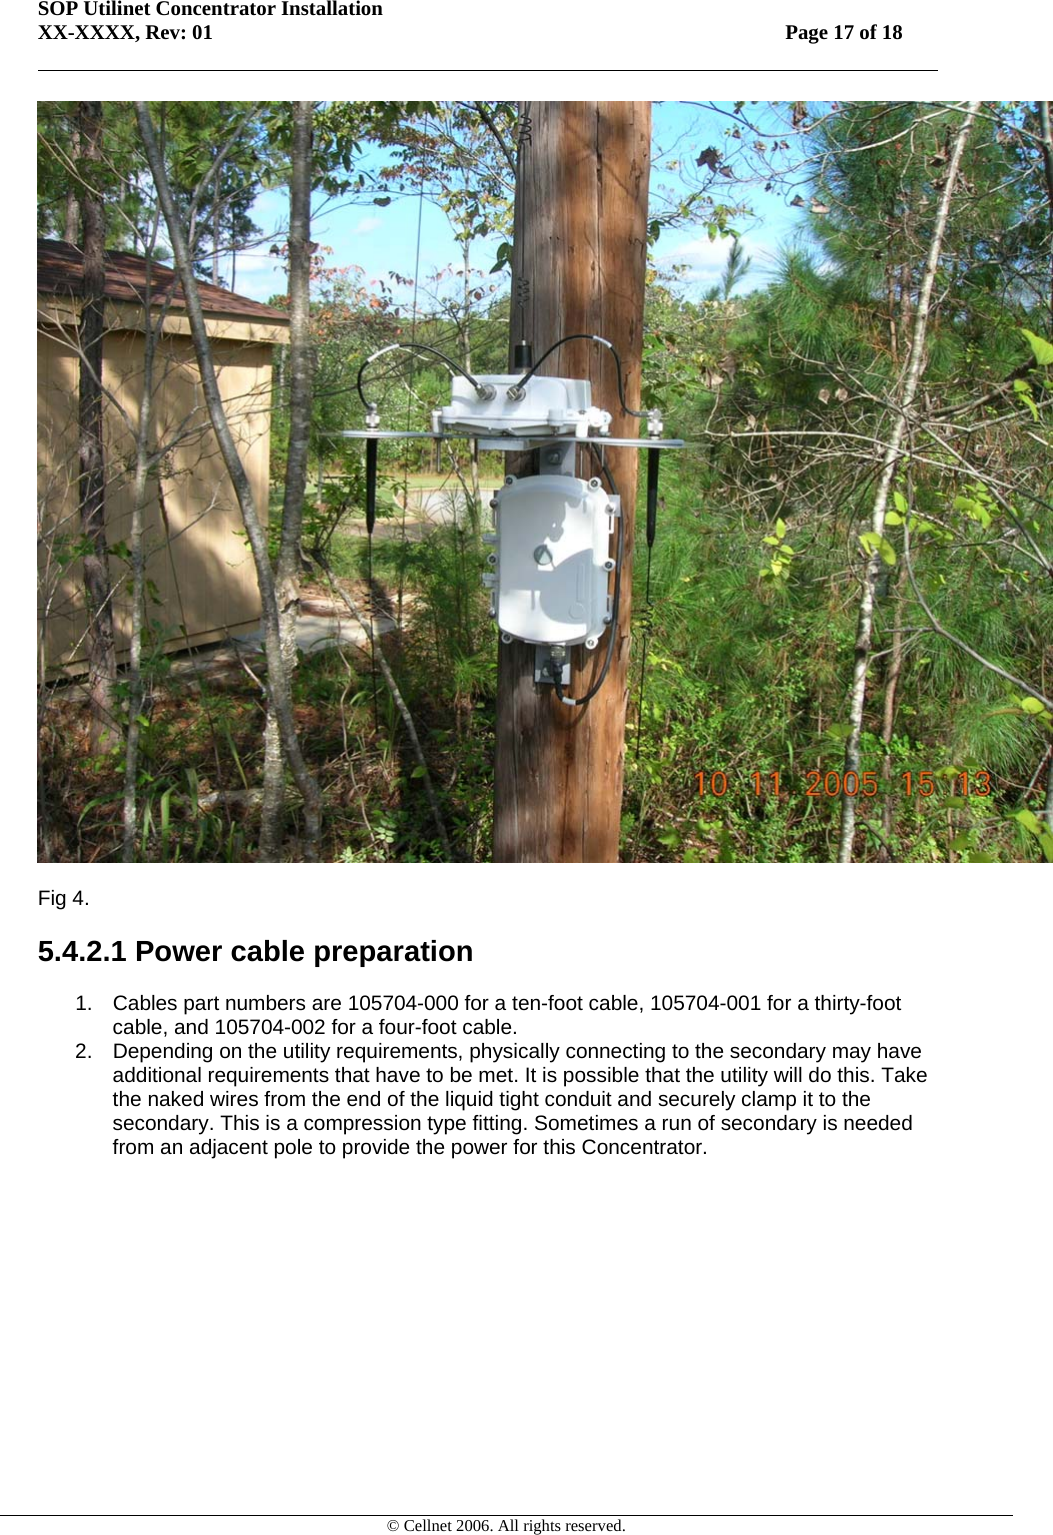 SOP Utilinet Concentrator Installation XX-XXXX, Rev: 01 Page 17 of 18         © Cellnet 2006. All rights reserved.   Fig 4.  5.4.2.1 Power cable preparation  1.  Cables part numbers are 105704-000 for a ten-foot cable, 105704-001 for a thirty-foot cable, and 105704-002 for a four-foot cable. 2.  Depending on the utility requirements, physically connecting to the secondary may have additional requirements that have to be met. It is possible that the utility will do this. Take the naked wires from the end of the liquid tight conduit and securely clamp it to the secondary. This is a compression type fitting. Sometimes a run of secondary is needed from an adjacent pole to provide the power for this Concentrator. 